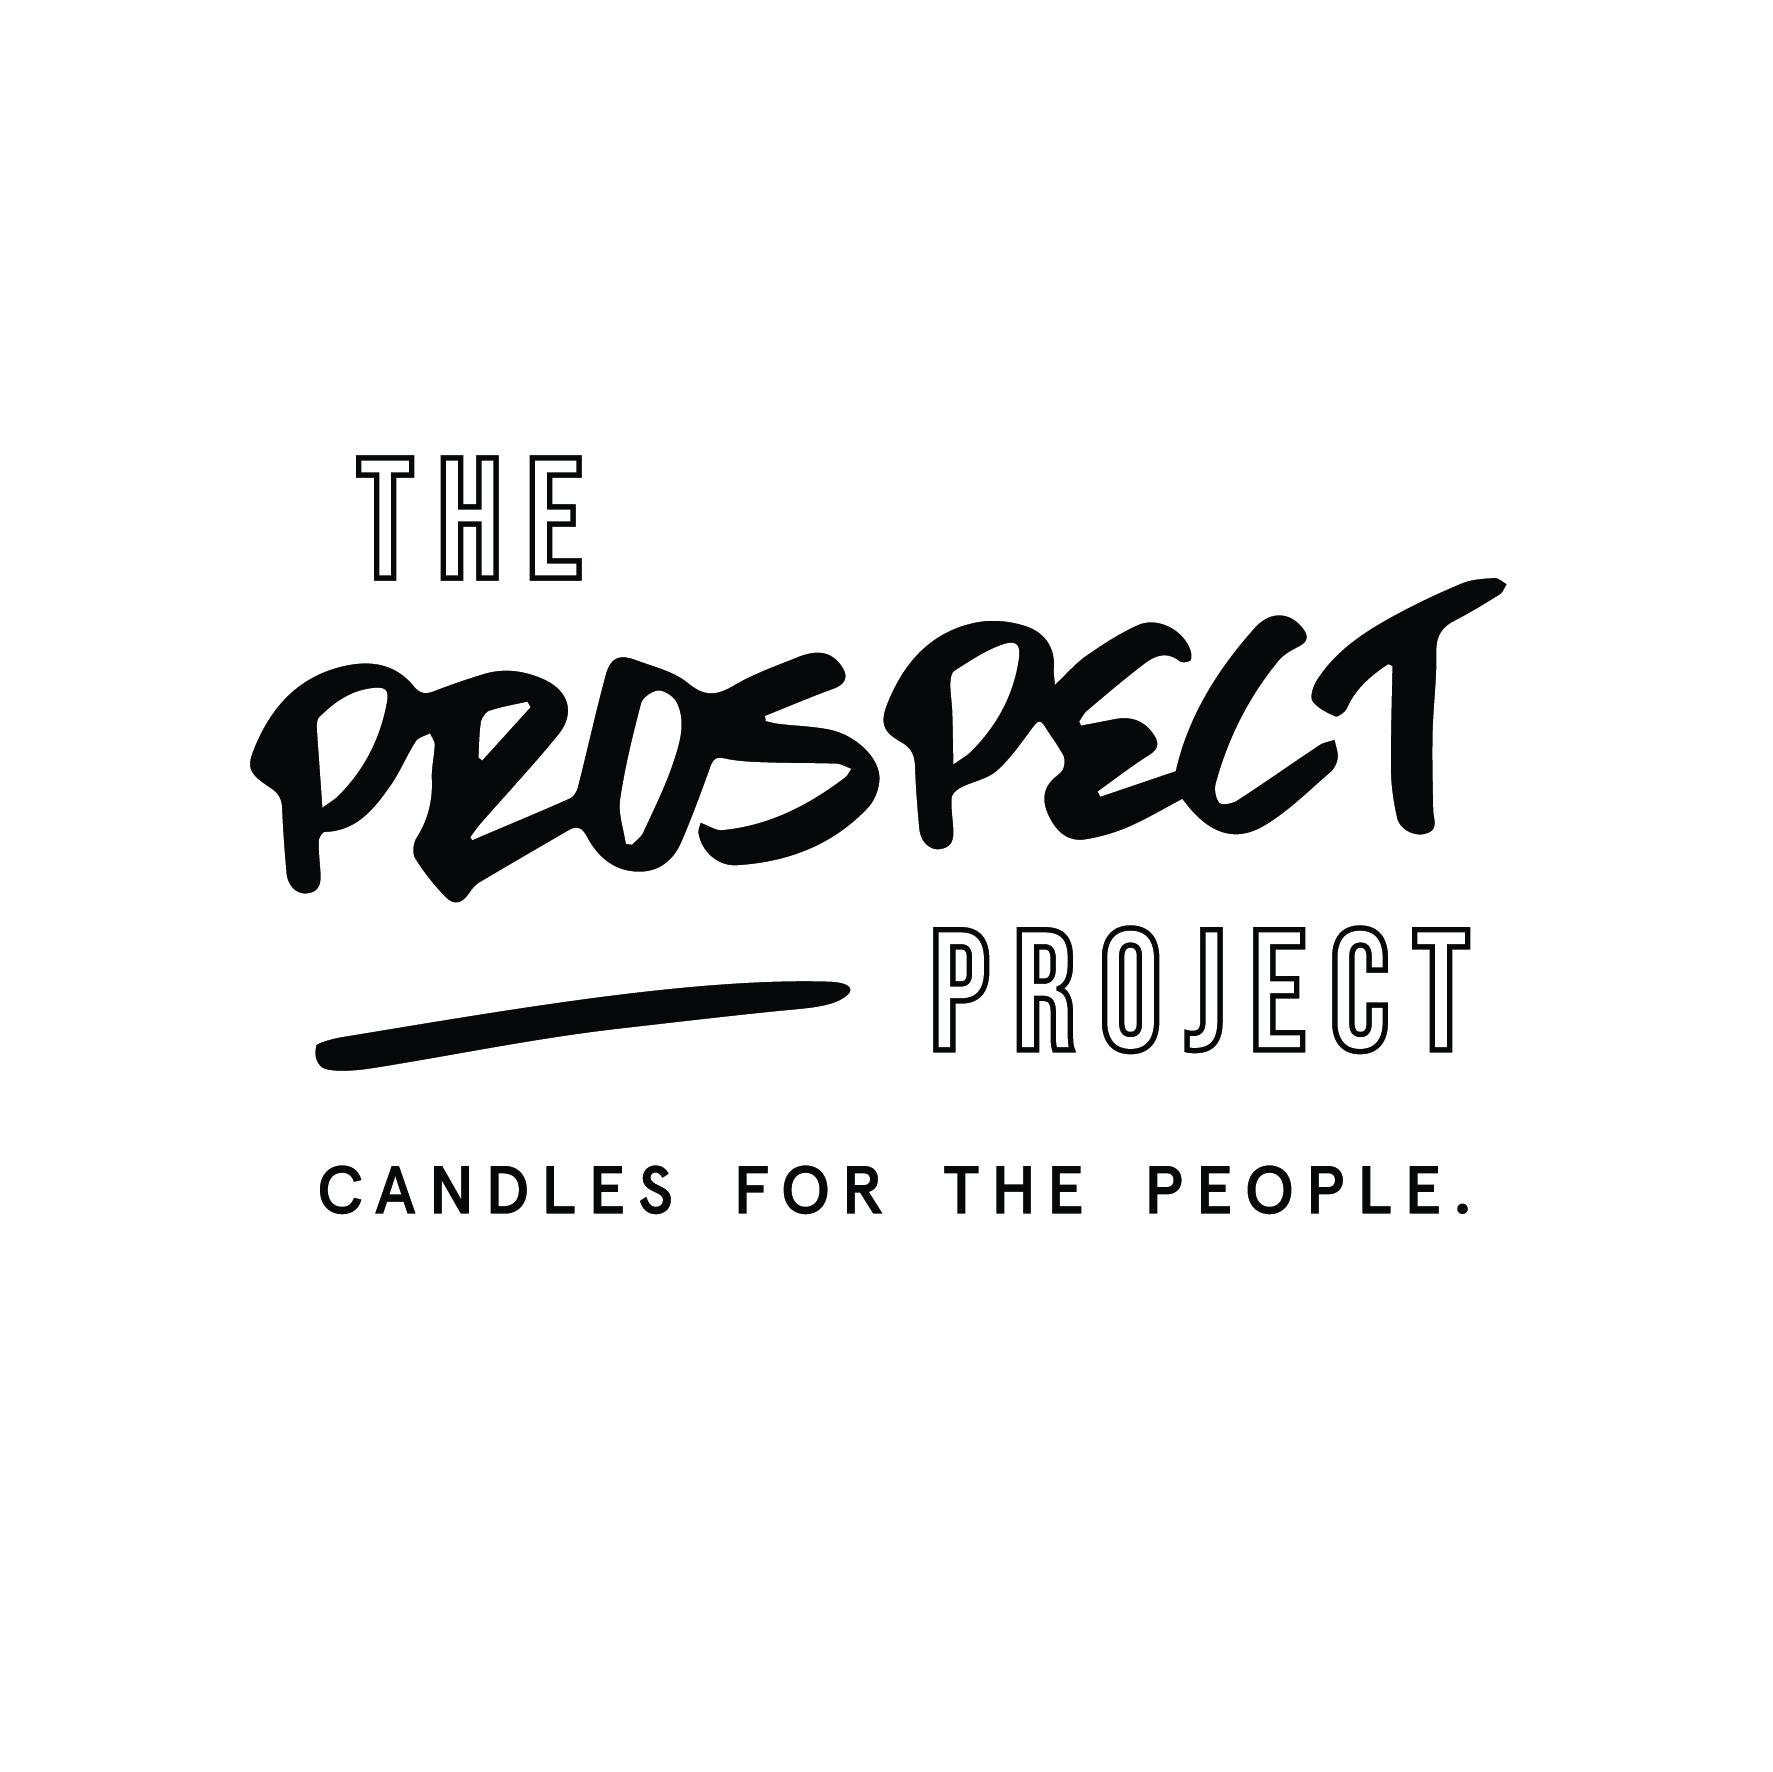 Woody, Contemporary / Modern, Bohemian, The Prospect Project Candles